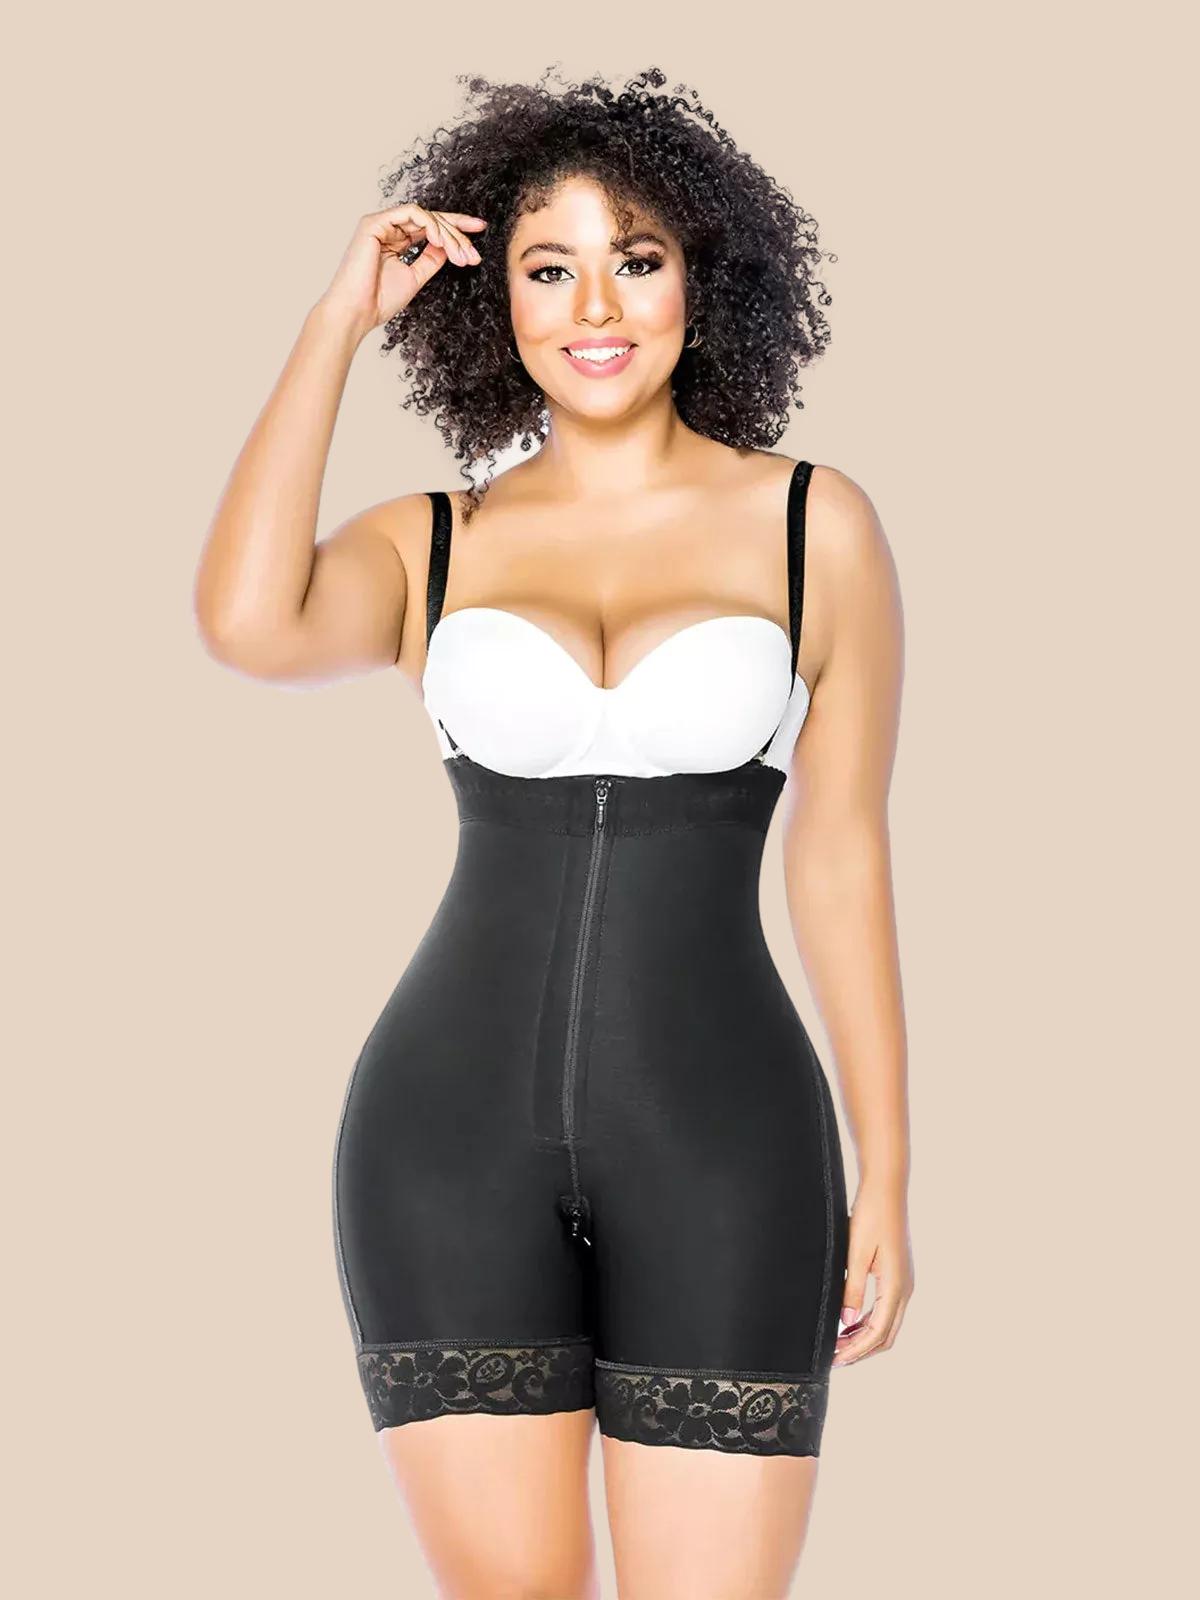 Fajas Colombianas Butt Lifter Shapewear Shorts Crotch with Zipper Ref  1008-ChicCurve